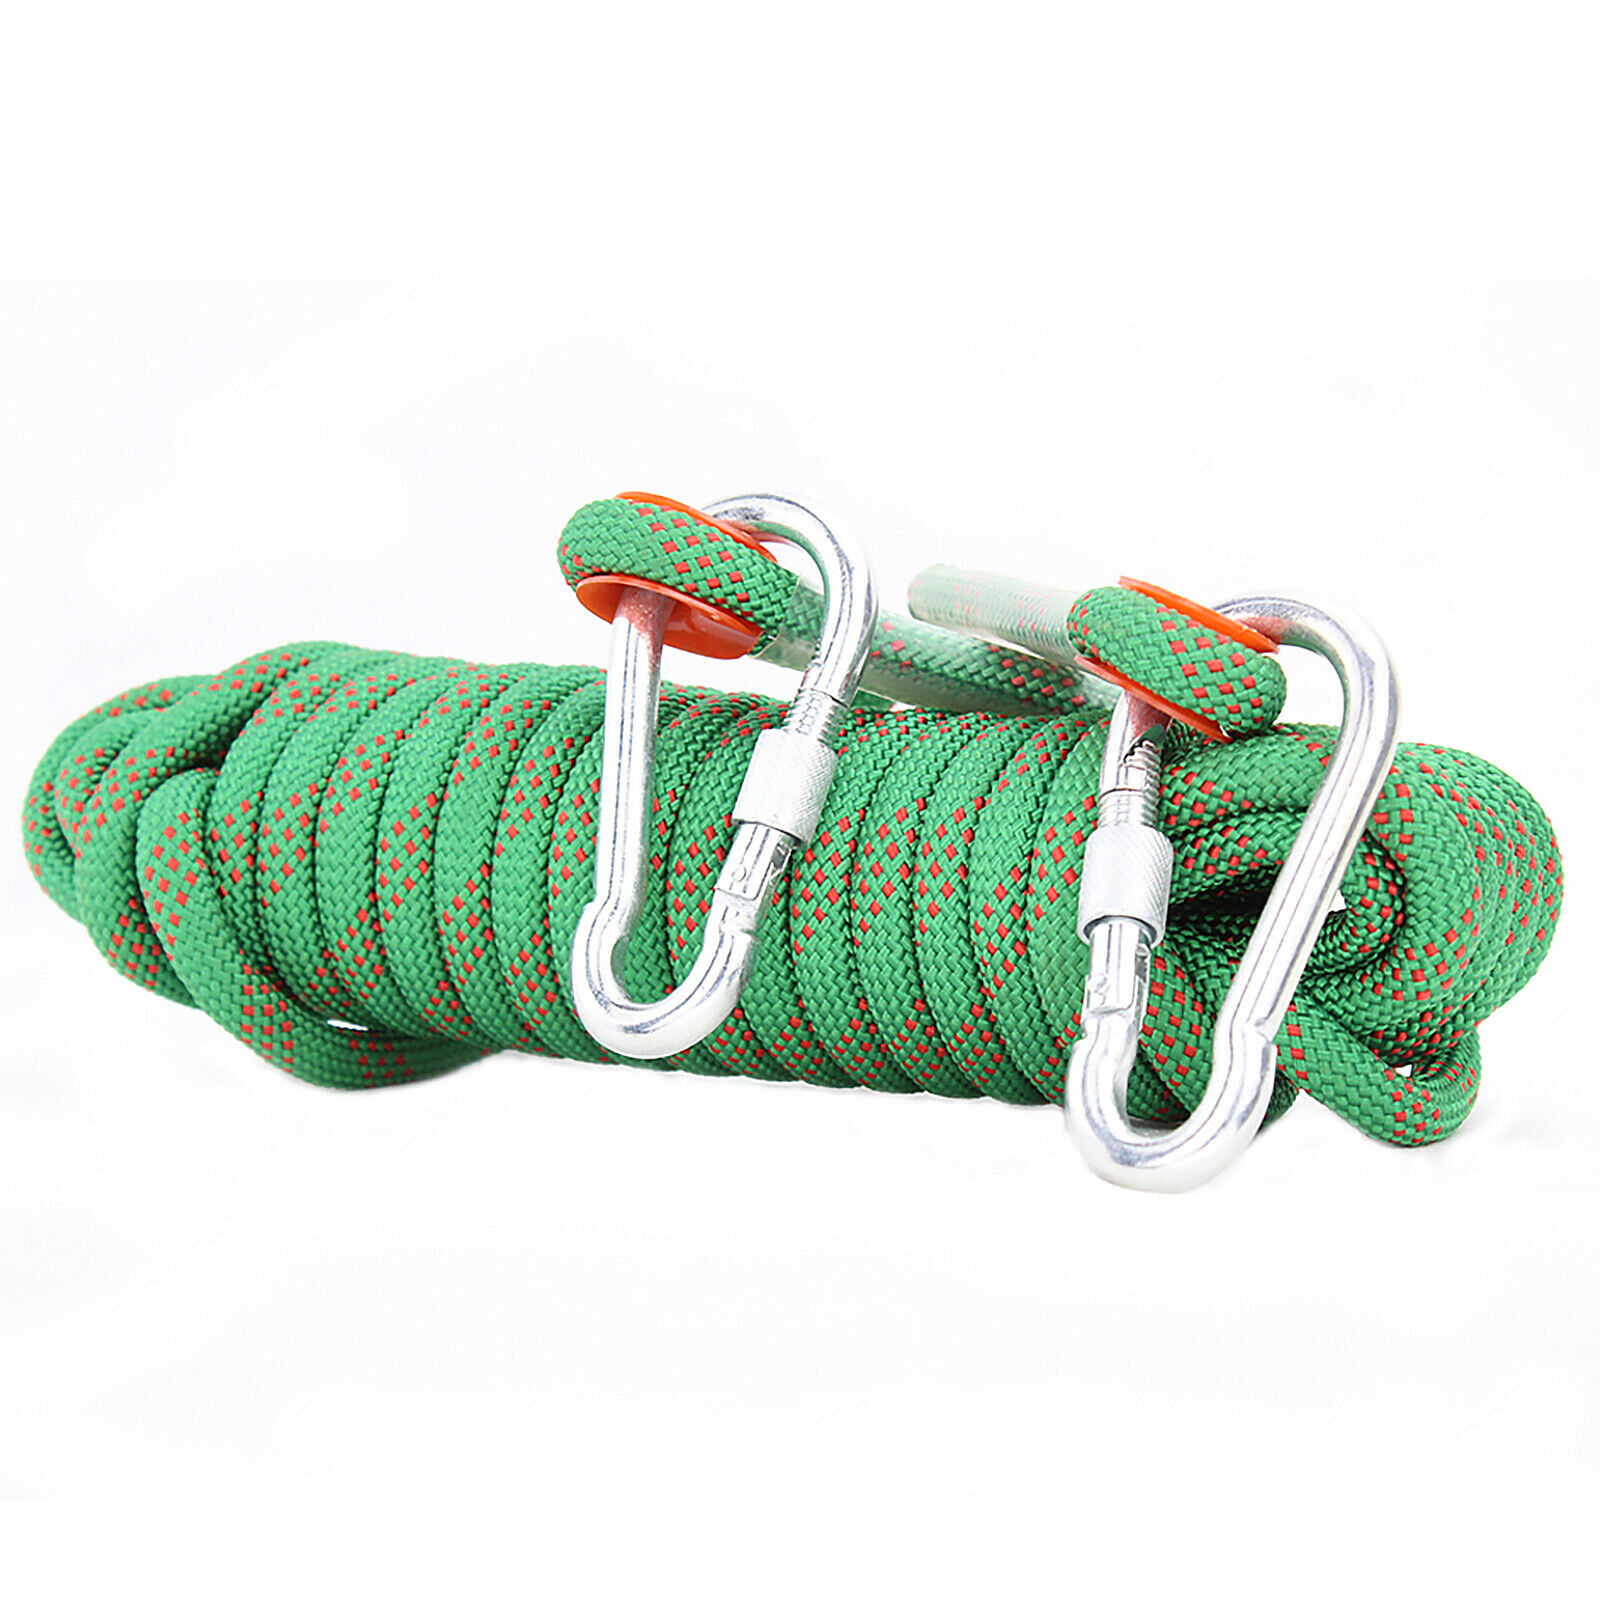 Escape Rope Climbing Equipment 10mm 32ft/64ft/96ft/160ft/230ft/500ft/985ft/1000ft with Carry Bag Rescue Rope Static Rock-Climbing Rope Nice C Climbing Rope